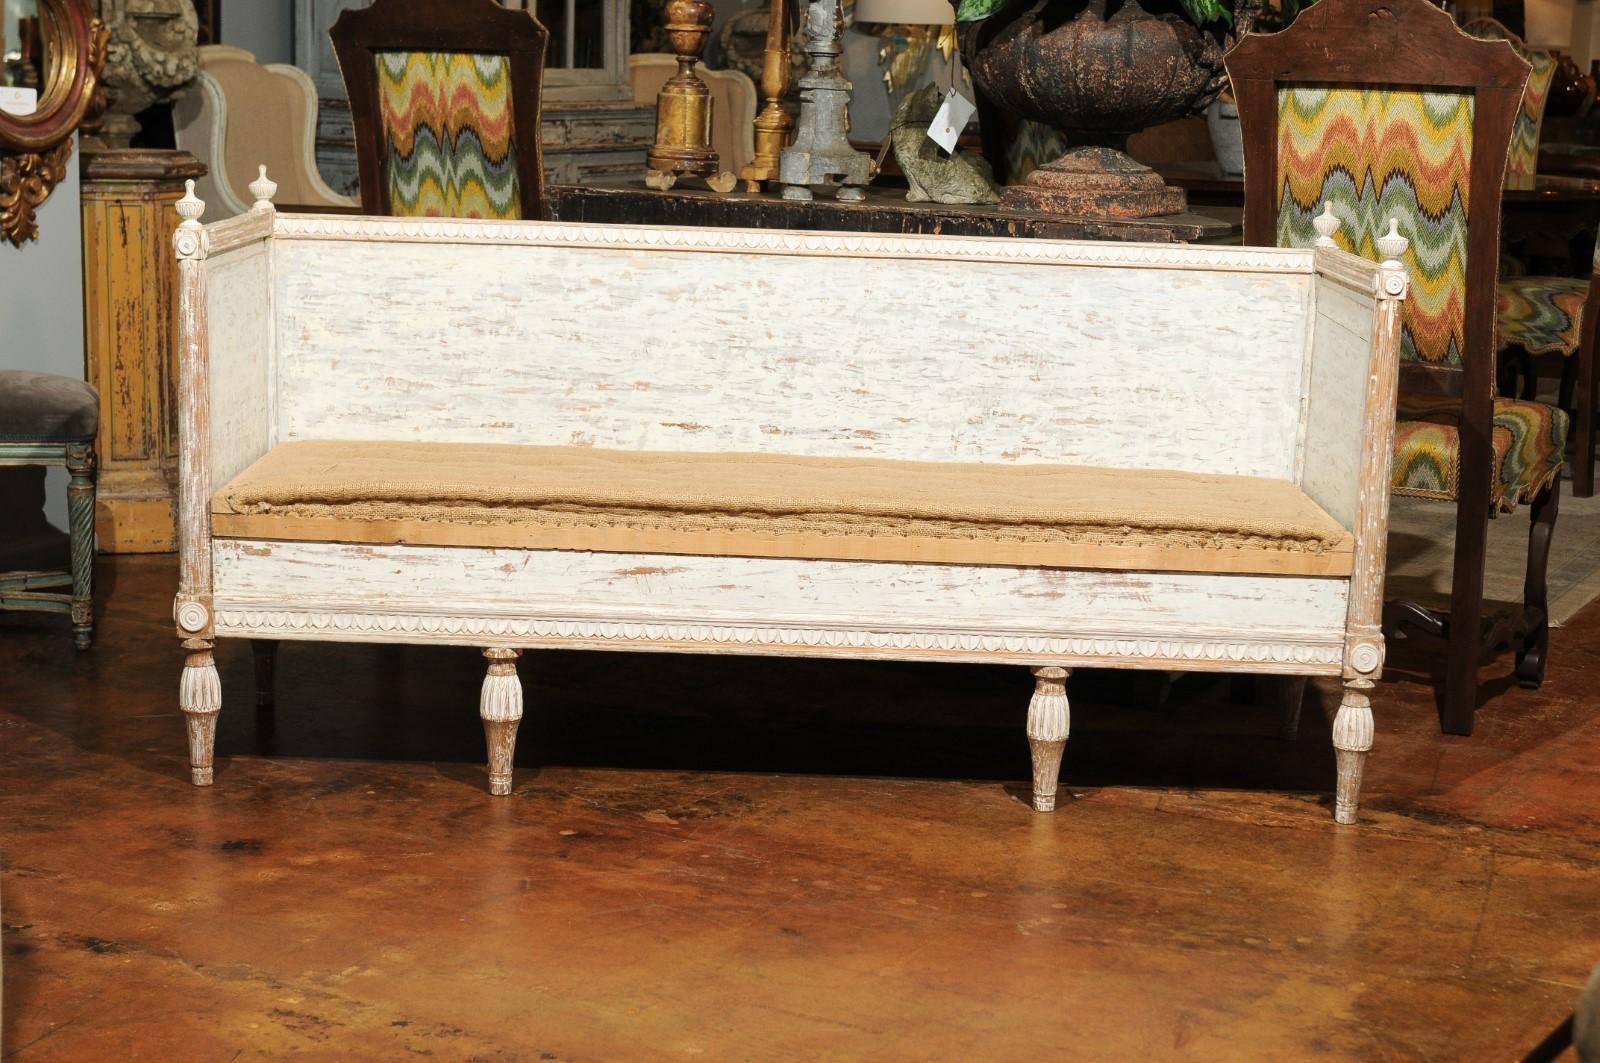 An Italian Neoclassical style painted and hand carved wooden bench from the mid-19th century, with distressed finish, under storage, finials, medallions and burlap upholstery. Born in Italy during the mid-19th century, this exquisite wooden bench